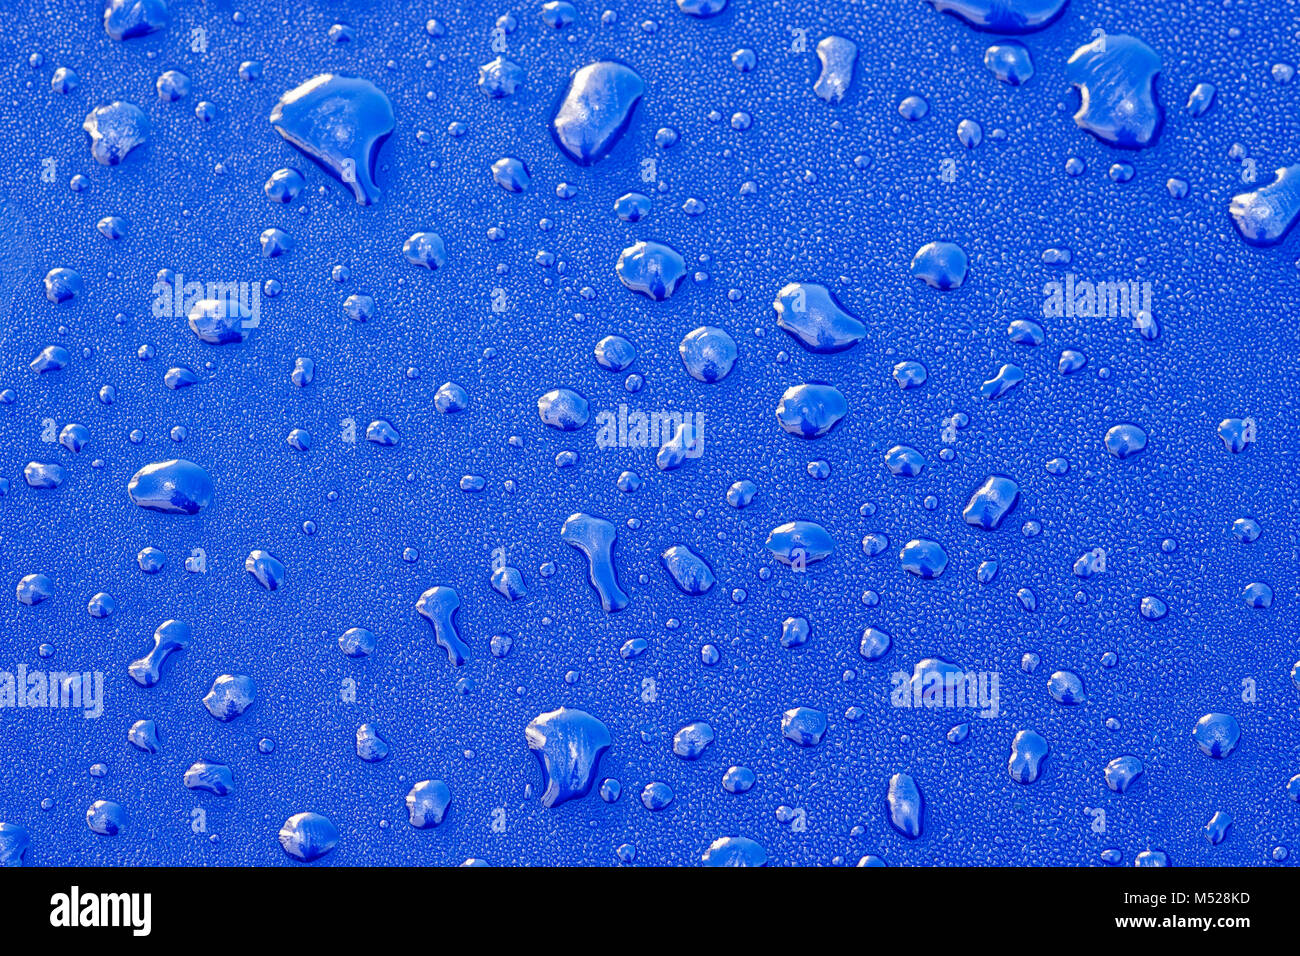 Details,Water droplets on blue paint Stock Photo